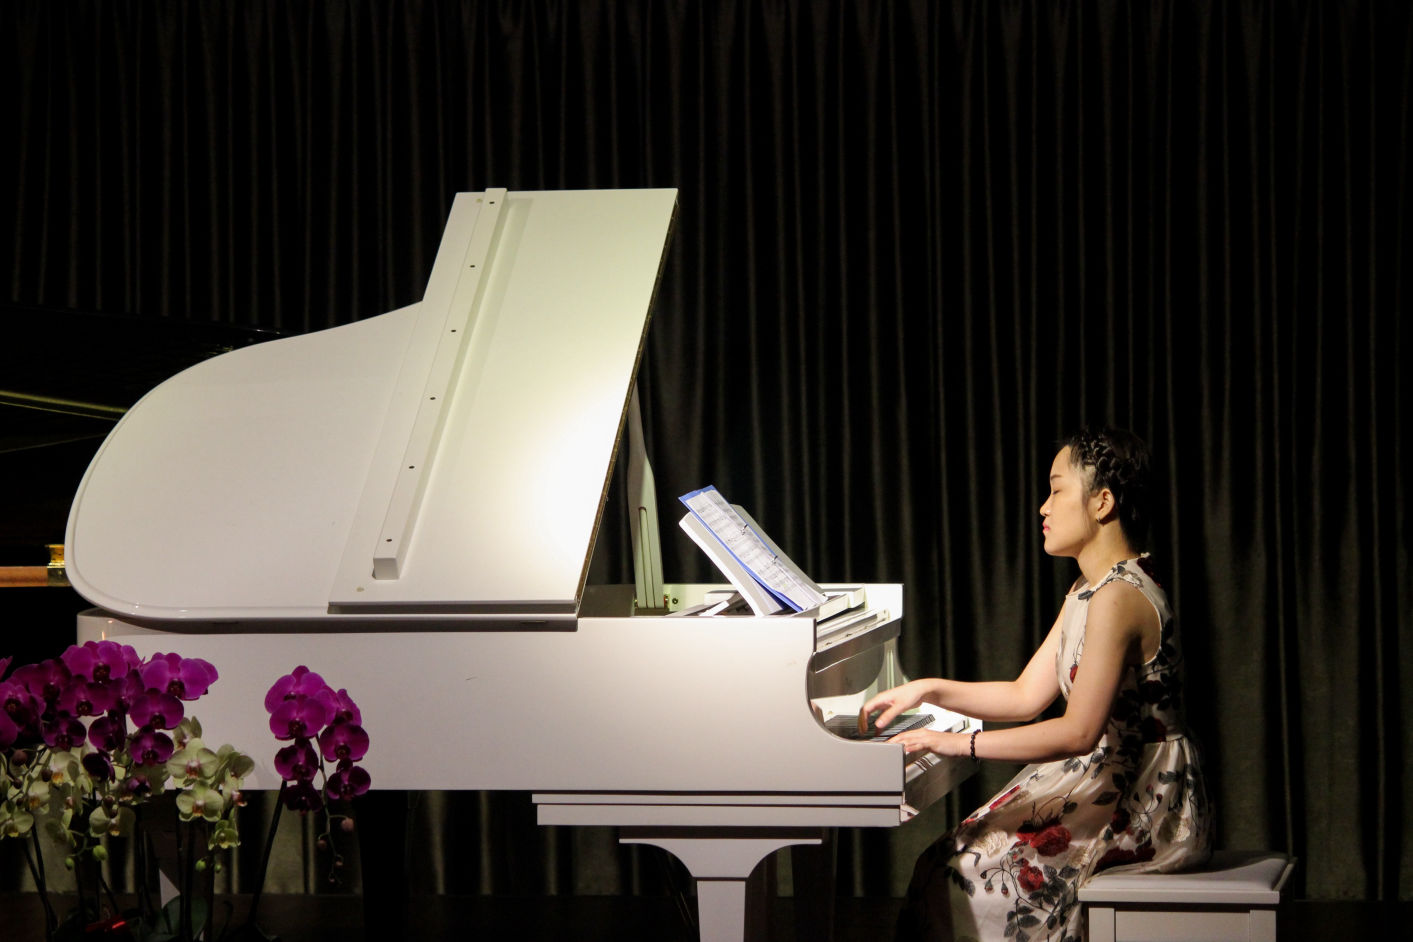 A young female student of Maria Drost's sings and plays a white piano at the Music School's annual Singing Academy Showcase